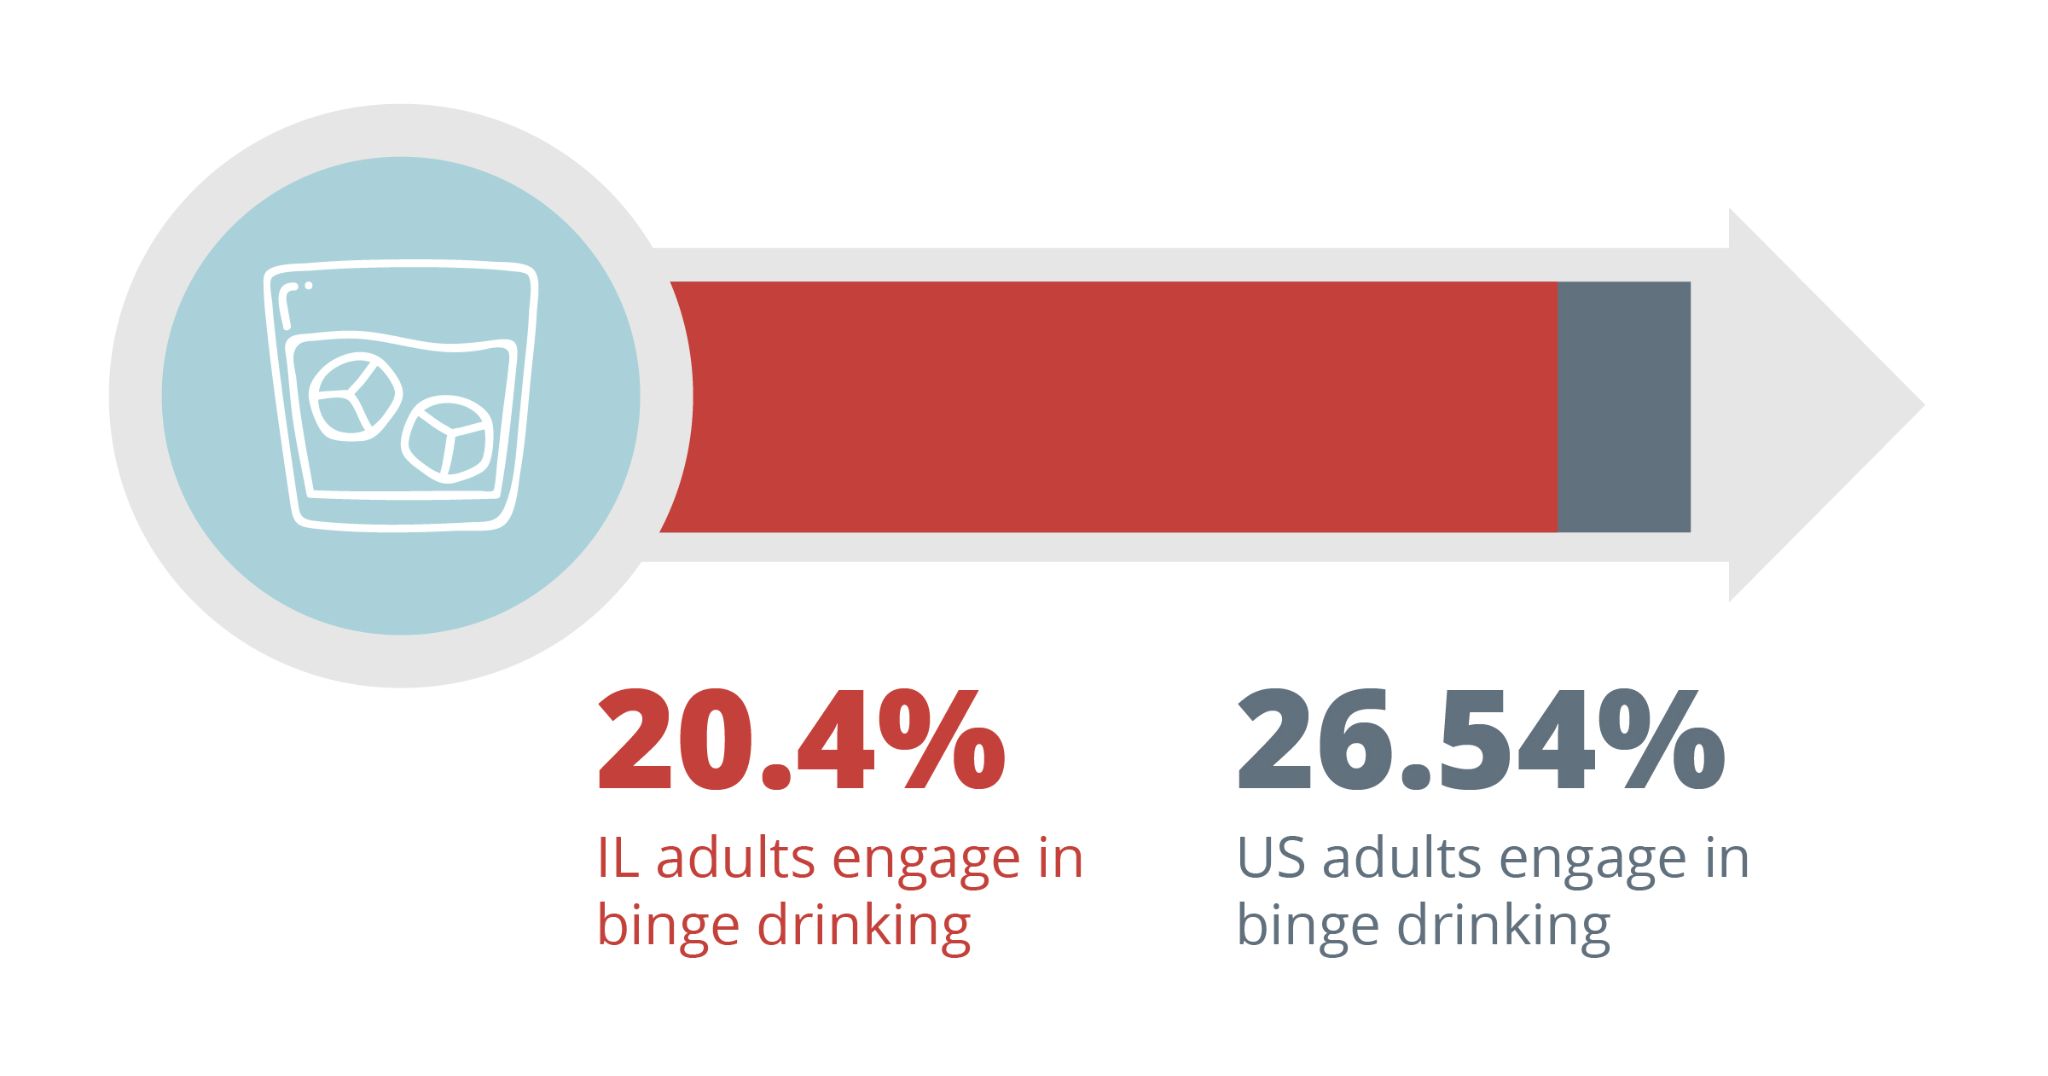 20.4% of illinois adults engage in binge drinking. 26.54% of American adults engage in binge drinking. Drug And Alcohol Detox & Rehab, Addiction Treatment Resources in Rockford Illinois